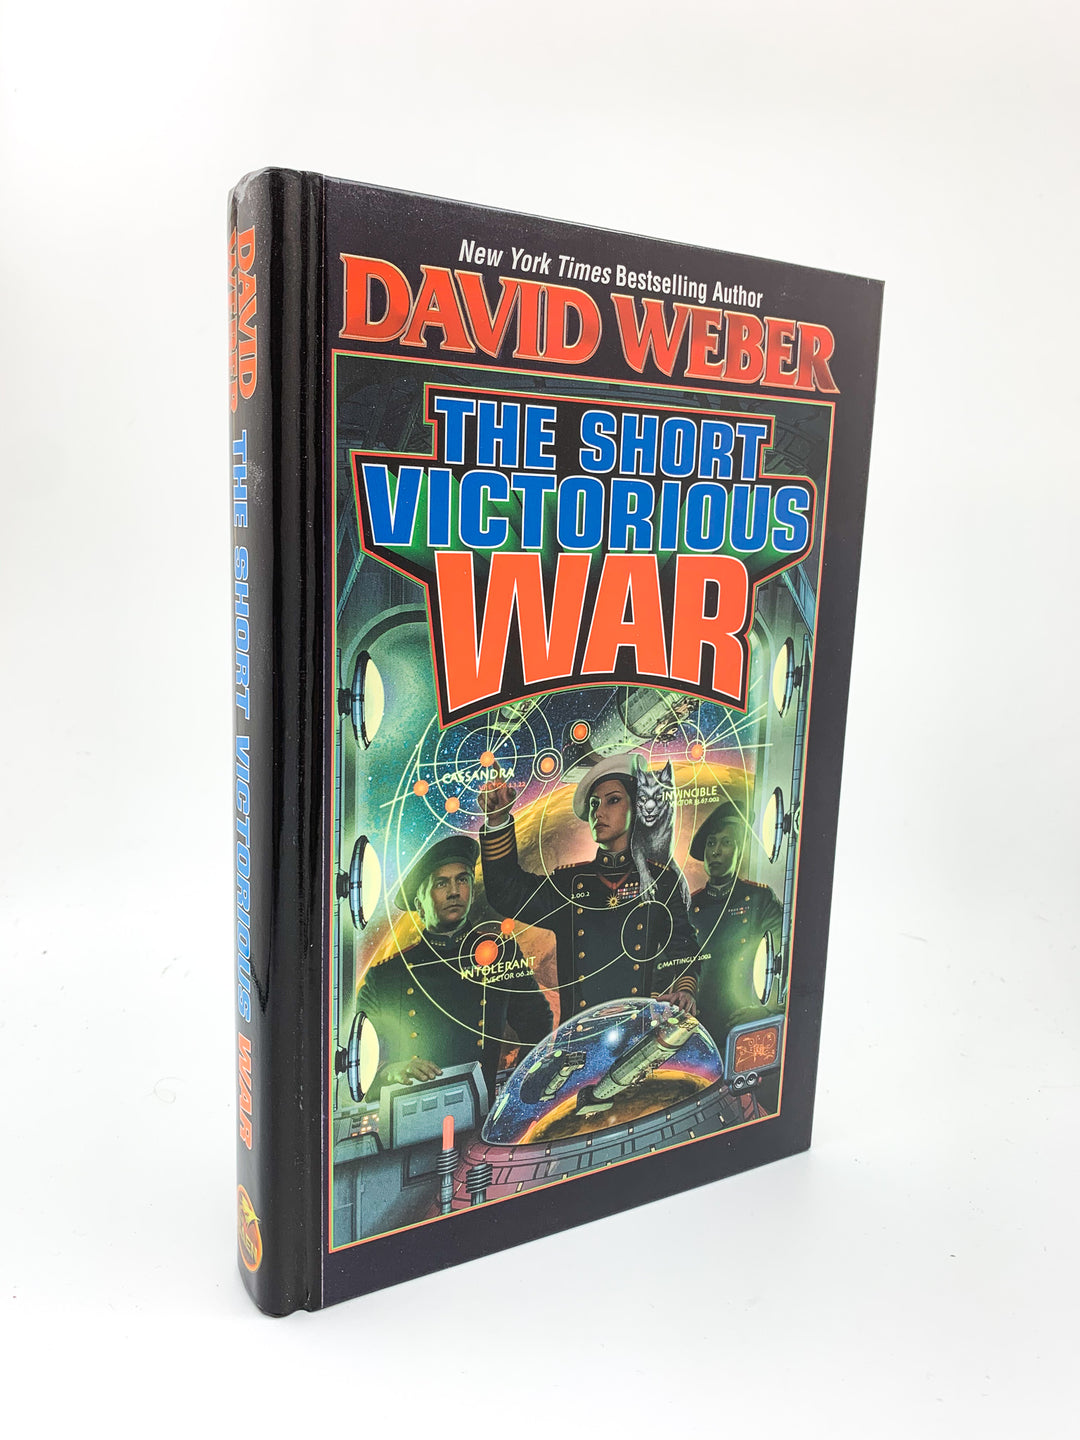 Weber, David - The Short Victorious War | front cover